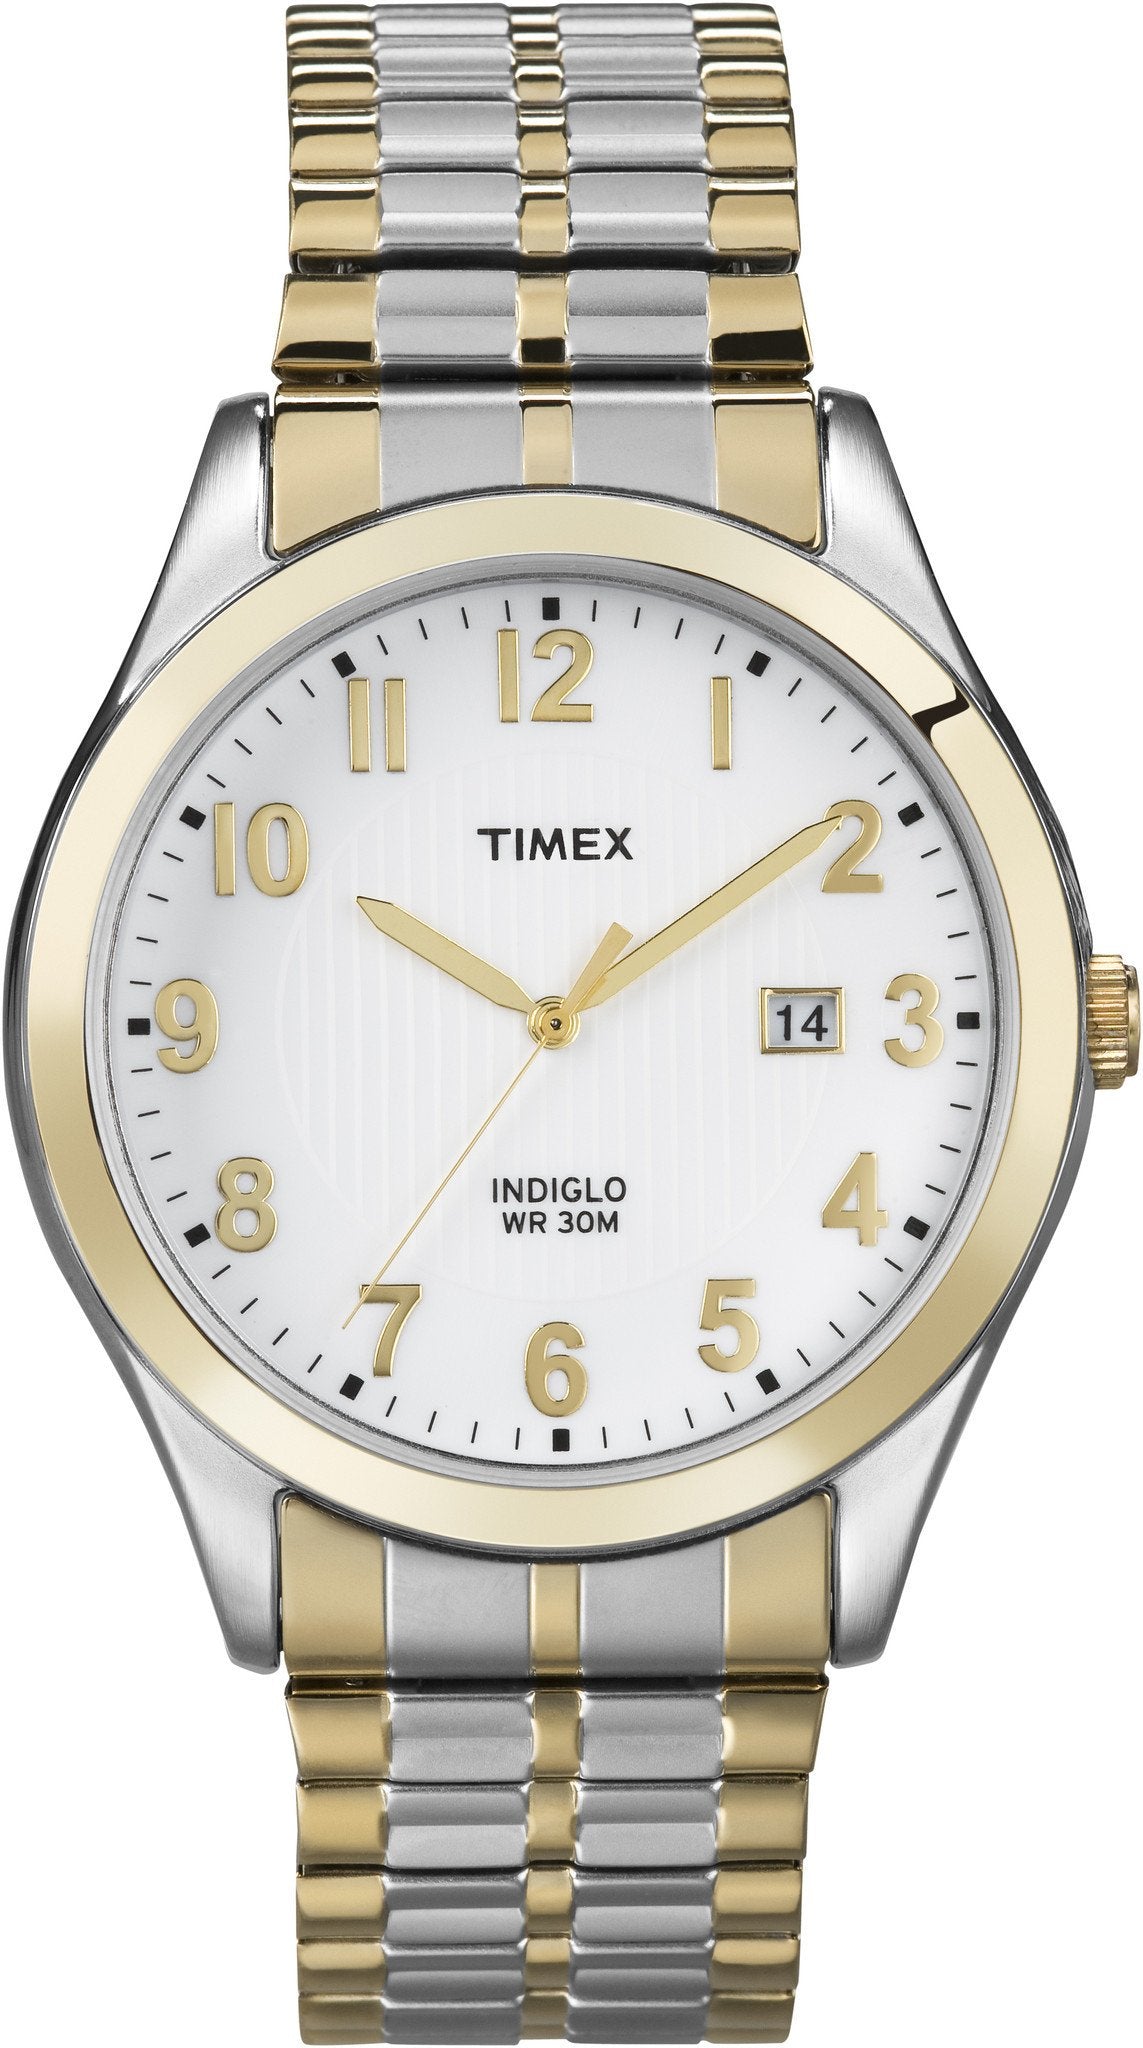 Timex Mens Two Tone Classic Expansion Band Watch